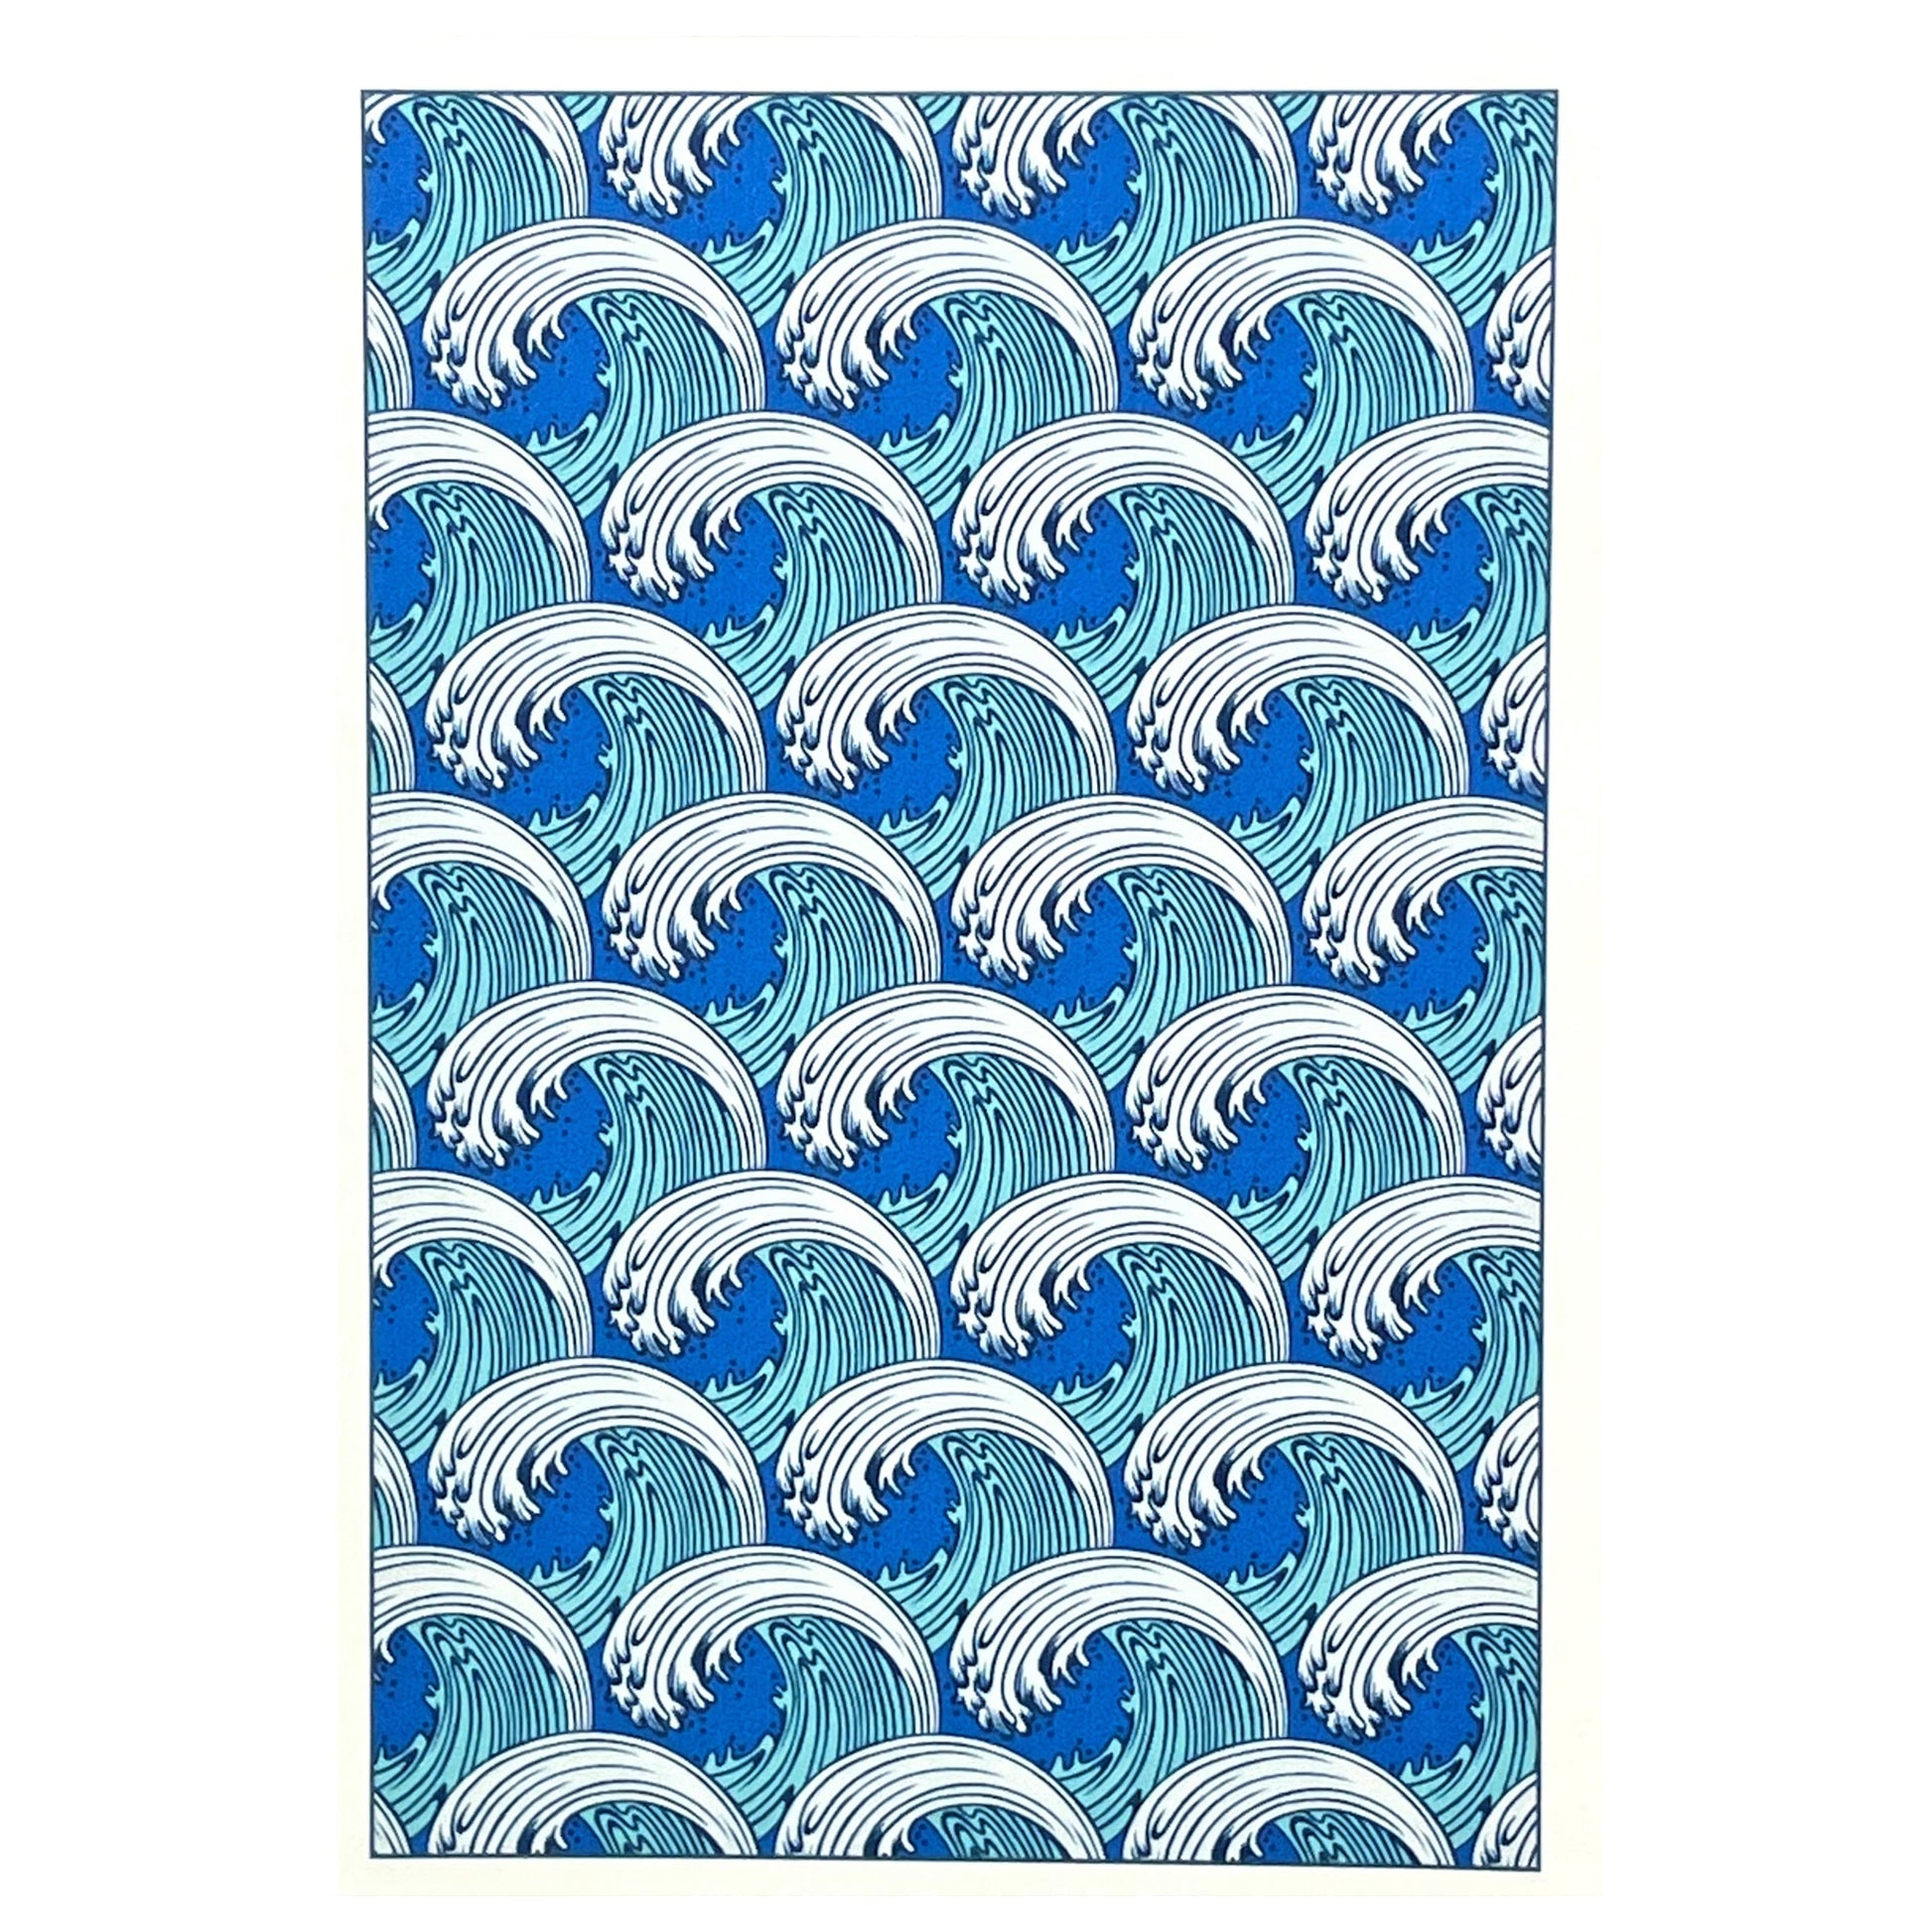 greetings card of japanese style blue waves design by Com Bossa Studio